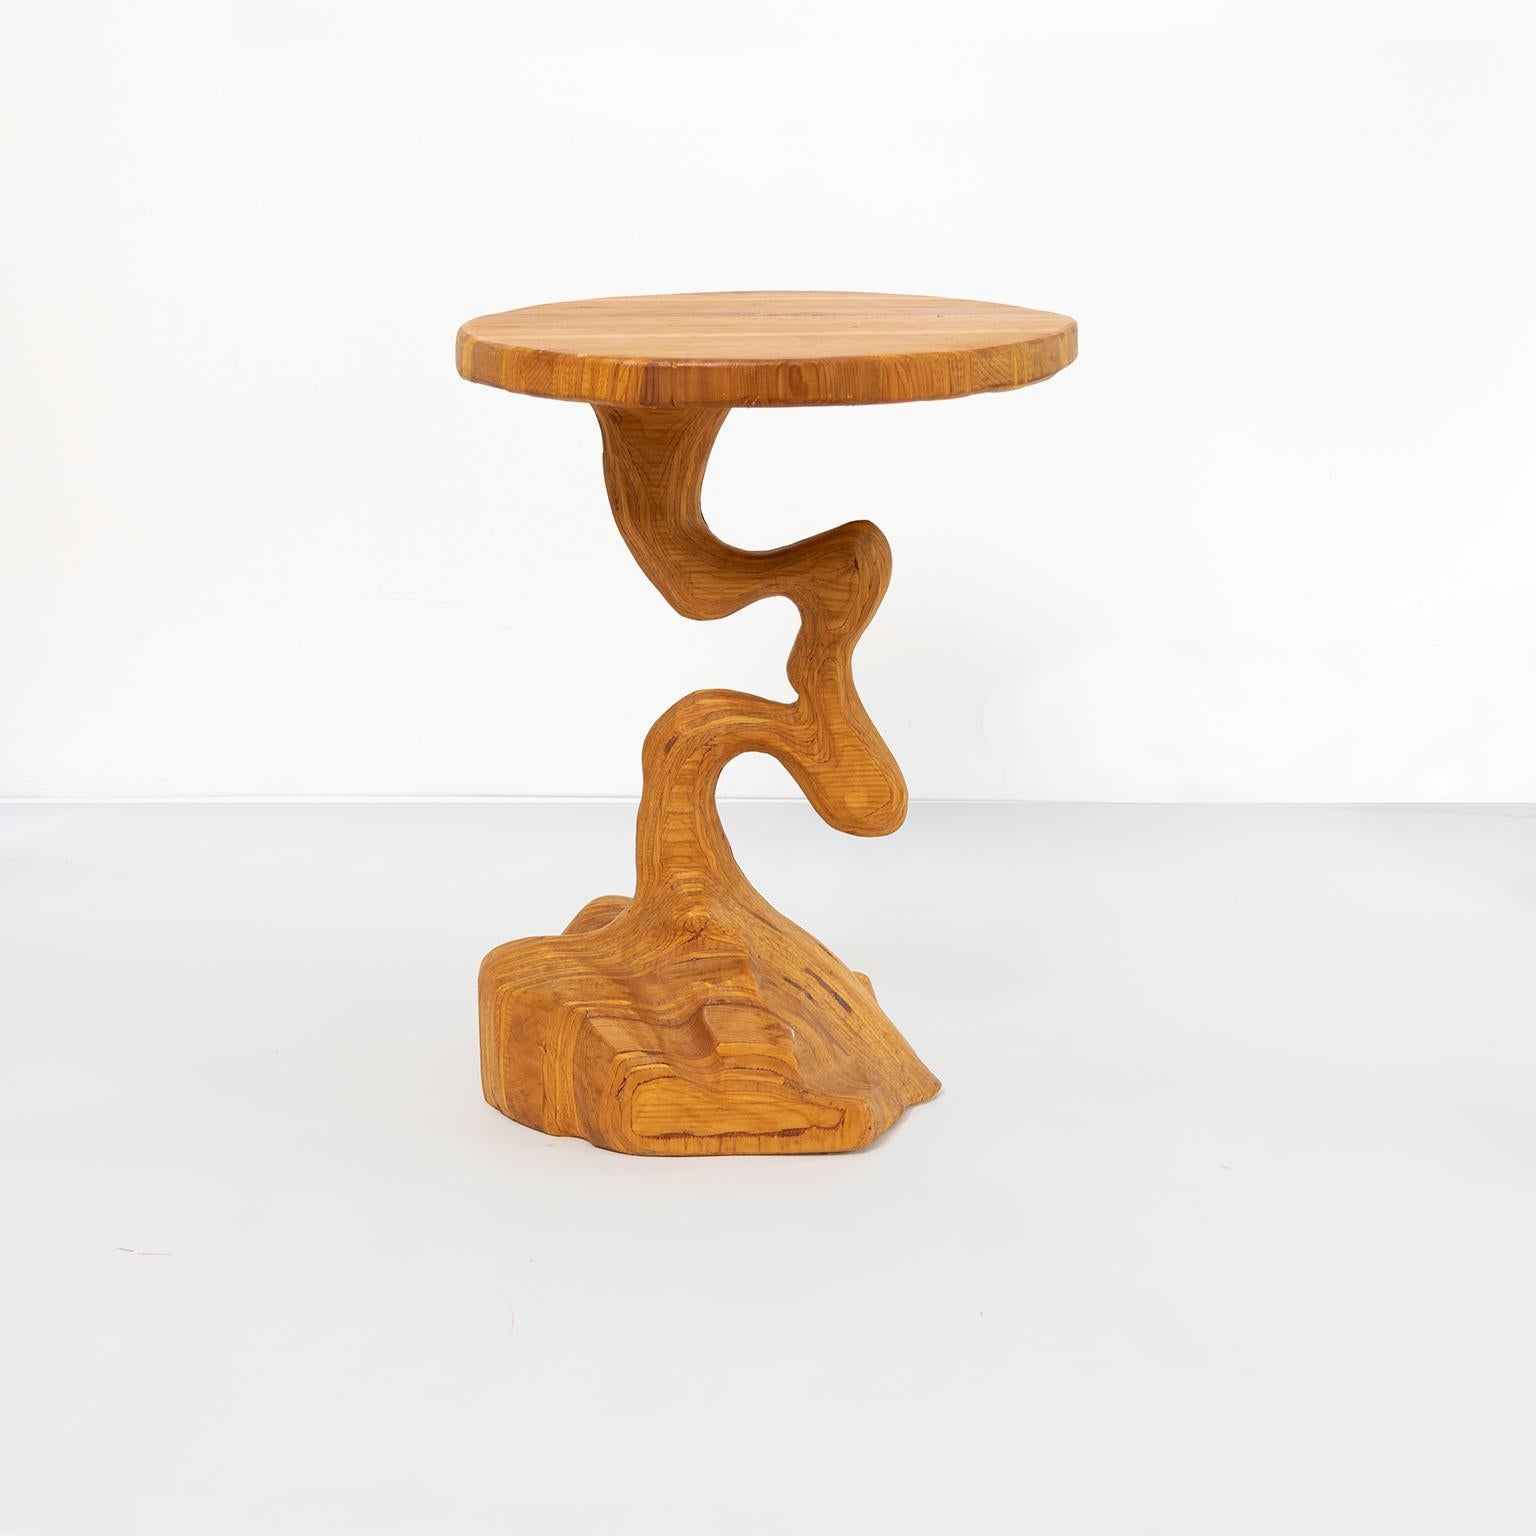 Unique ply and hand carved pine occasional table with twisted column and round top. Made in Sweden late 20th century, 

Height: 24“ Top Diameter: 17.5”.